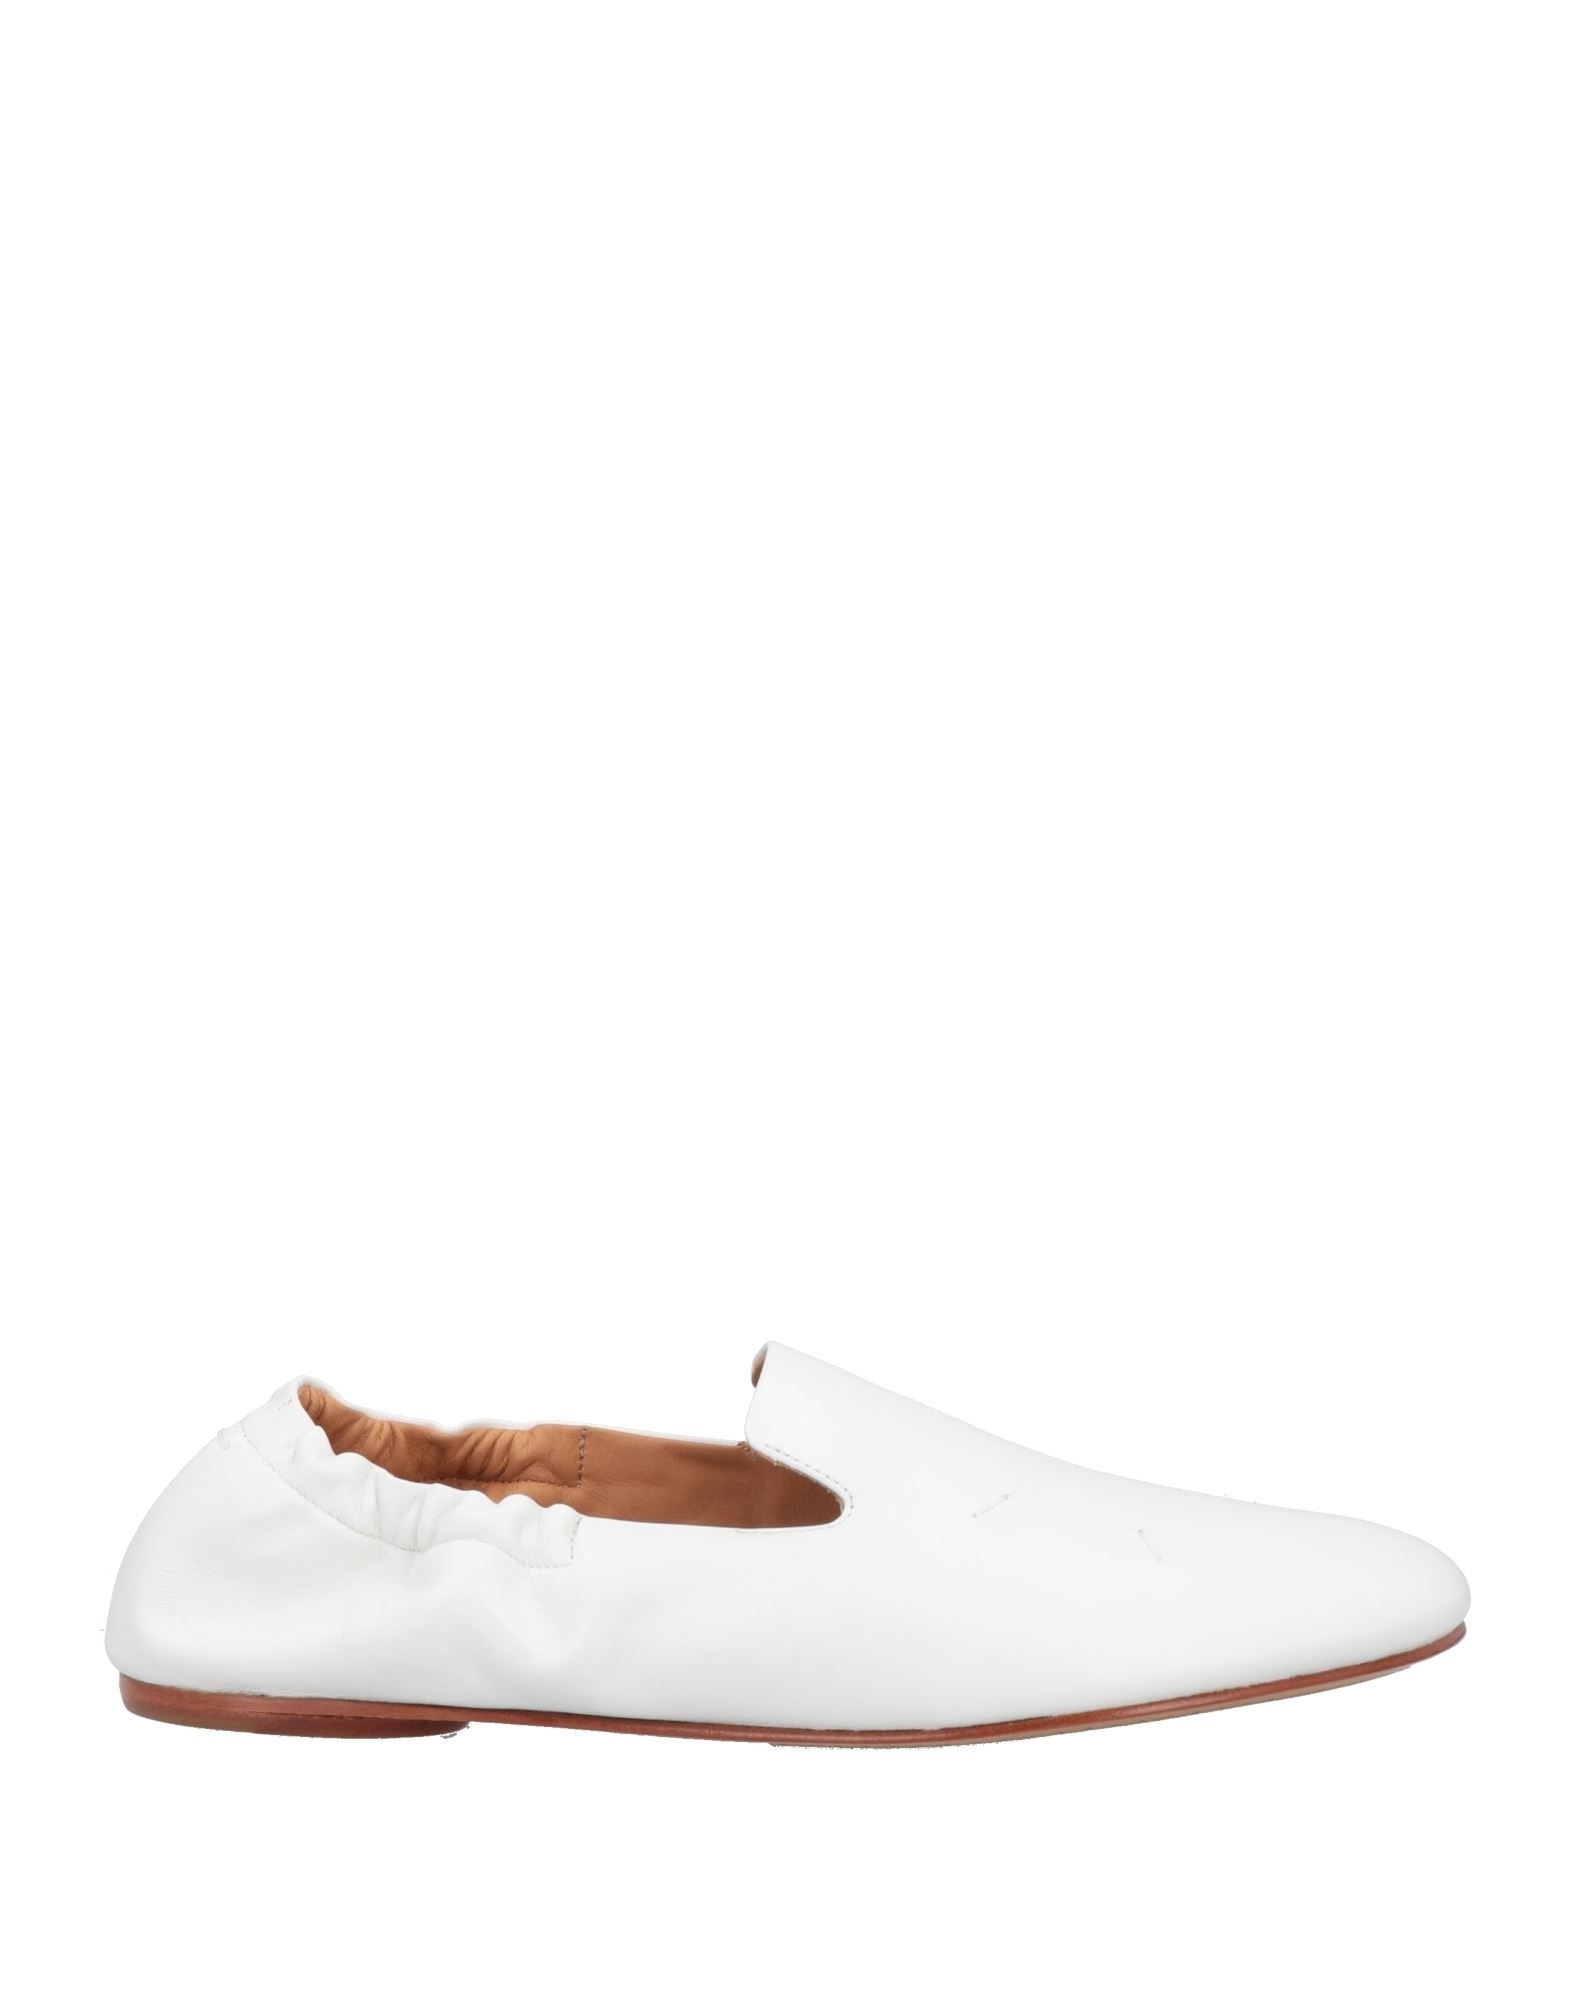 Maison Margiela Loafers In White